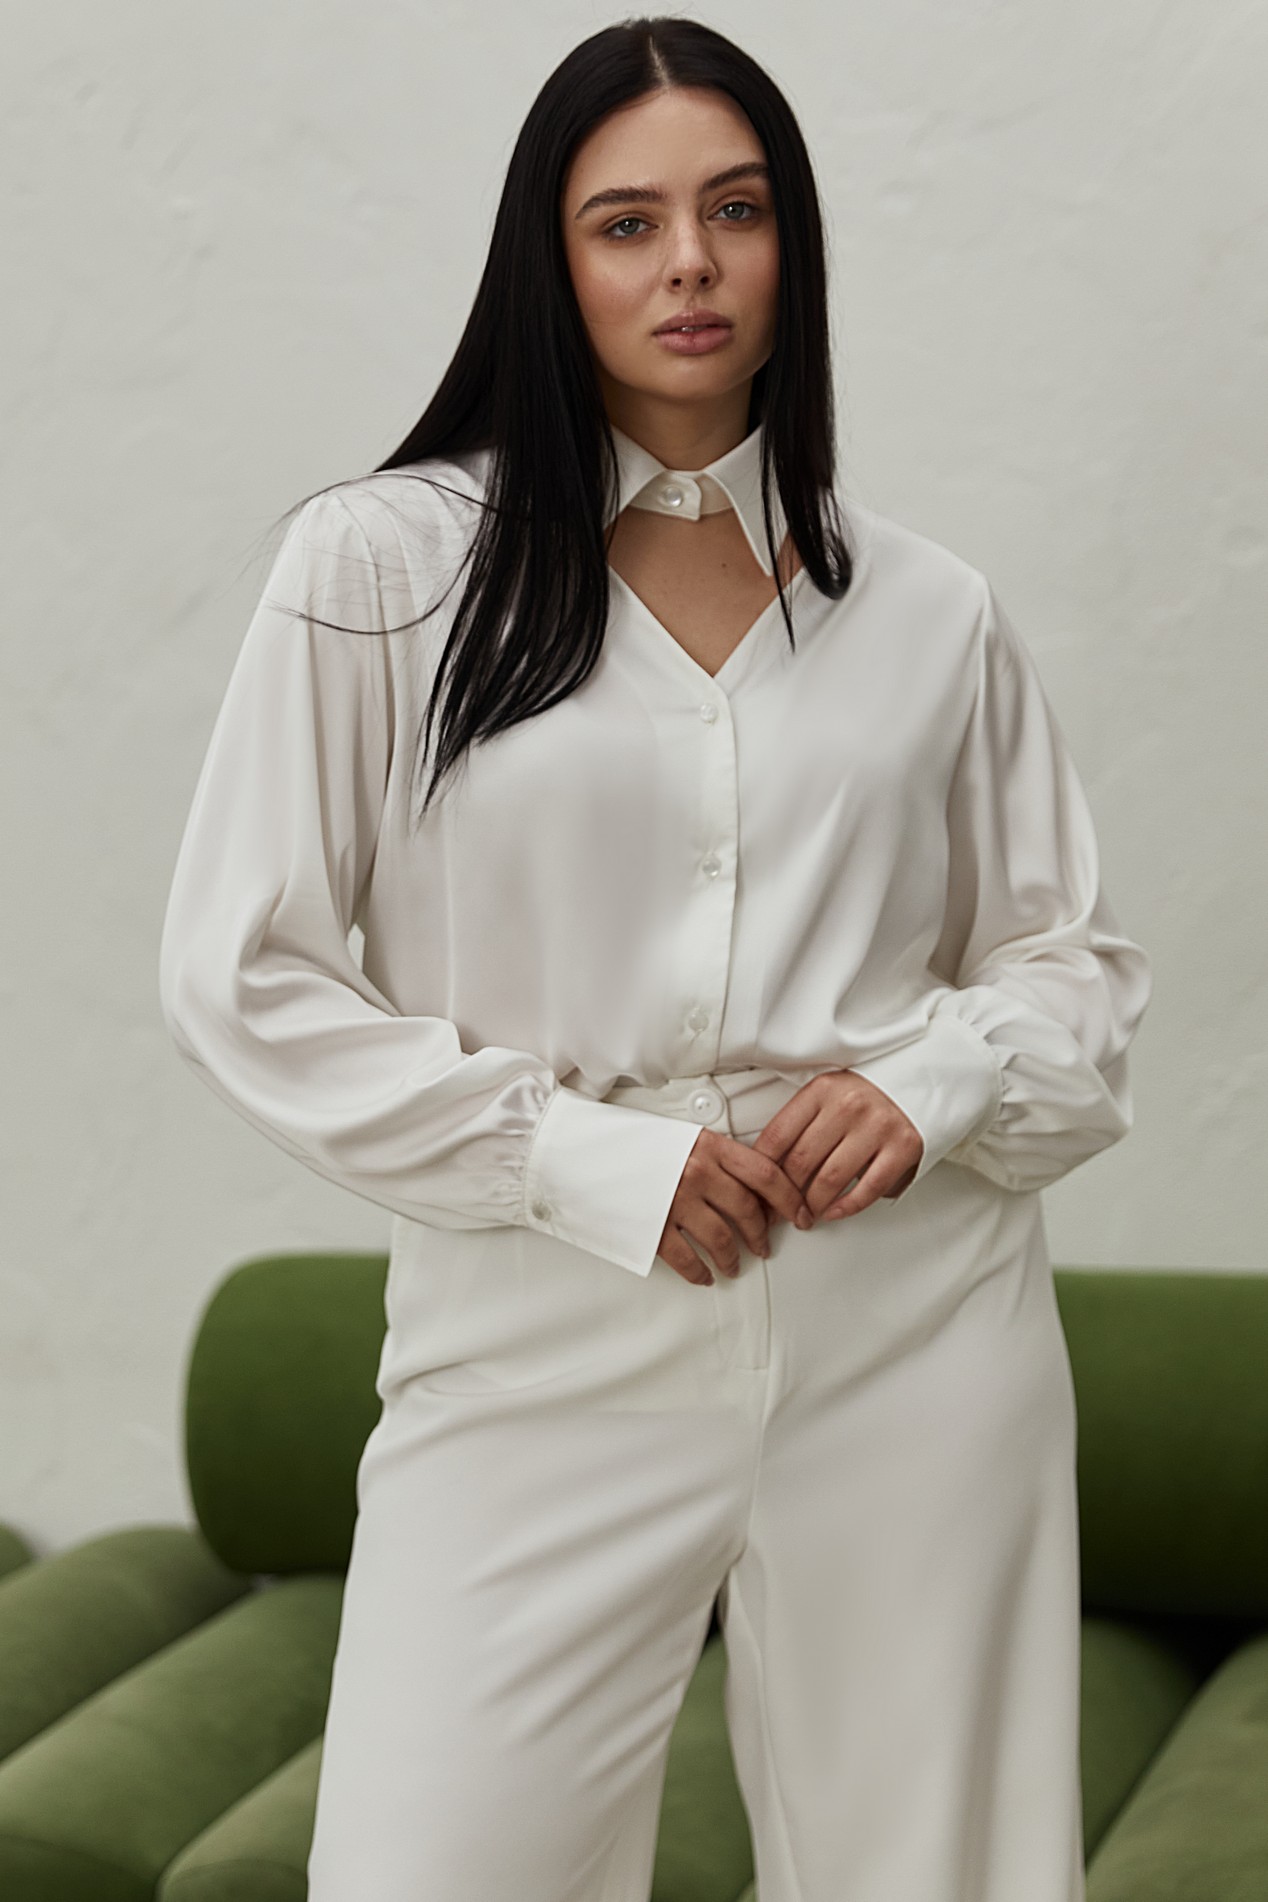 Buy Milky blouse with collar made of artificial silk plus size: blouse,  white color, artificial silk, casual style, buy in VOVK online store.